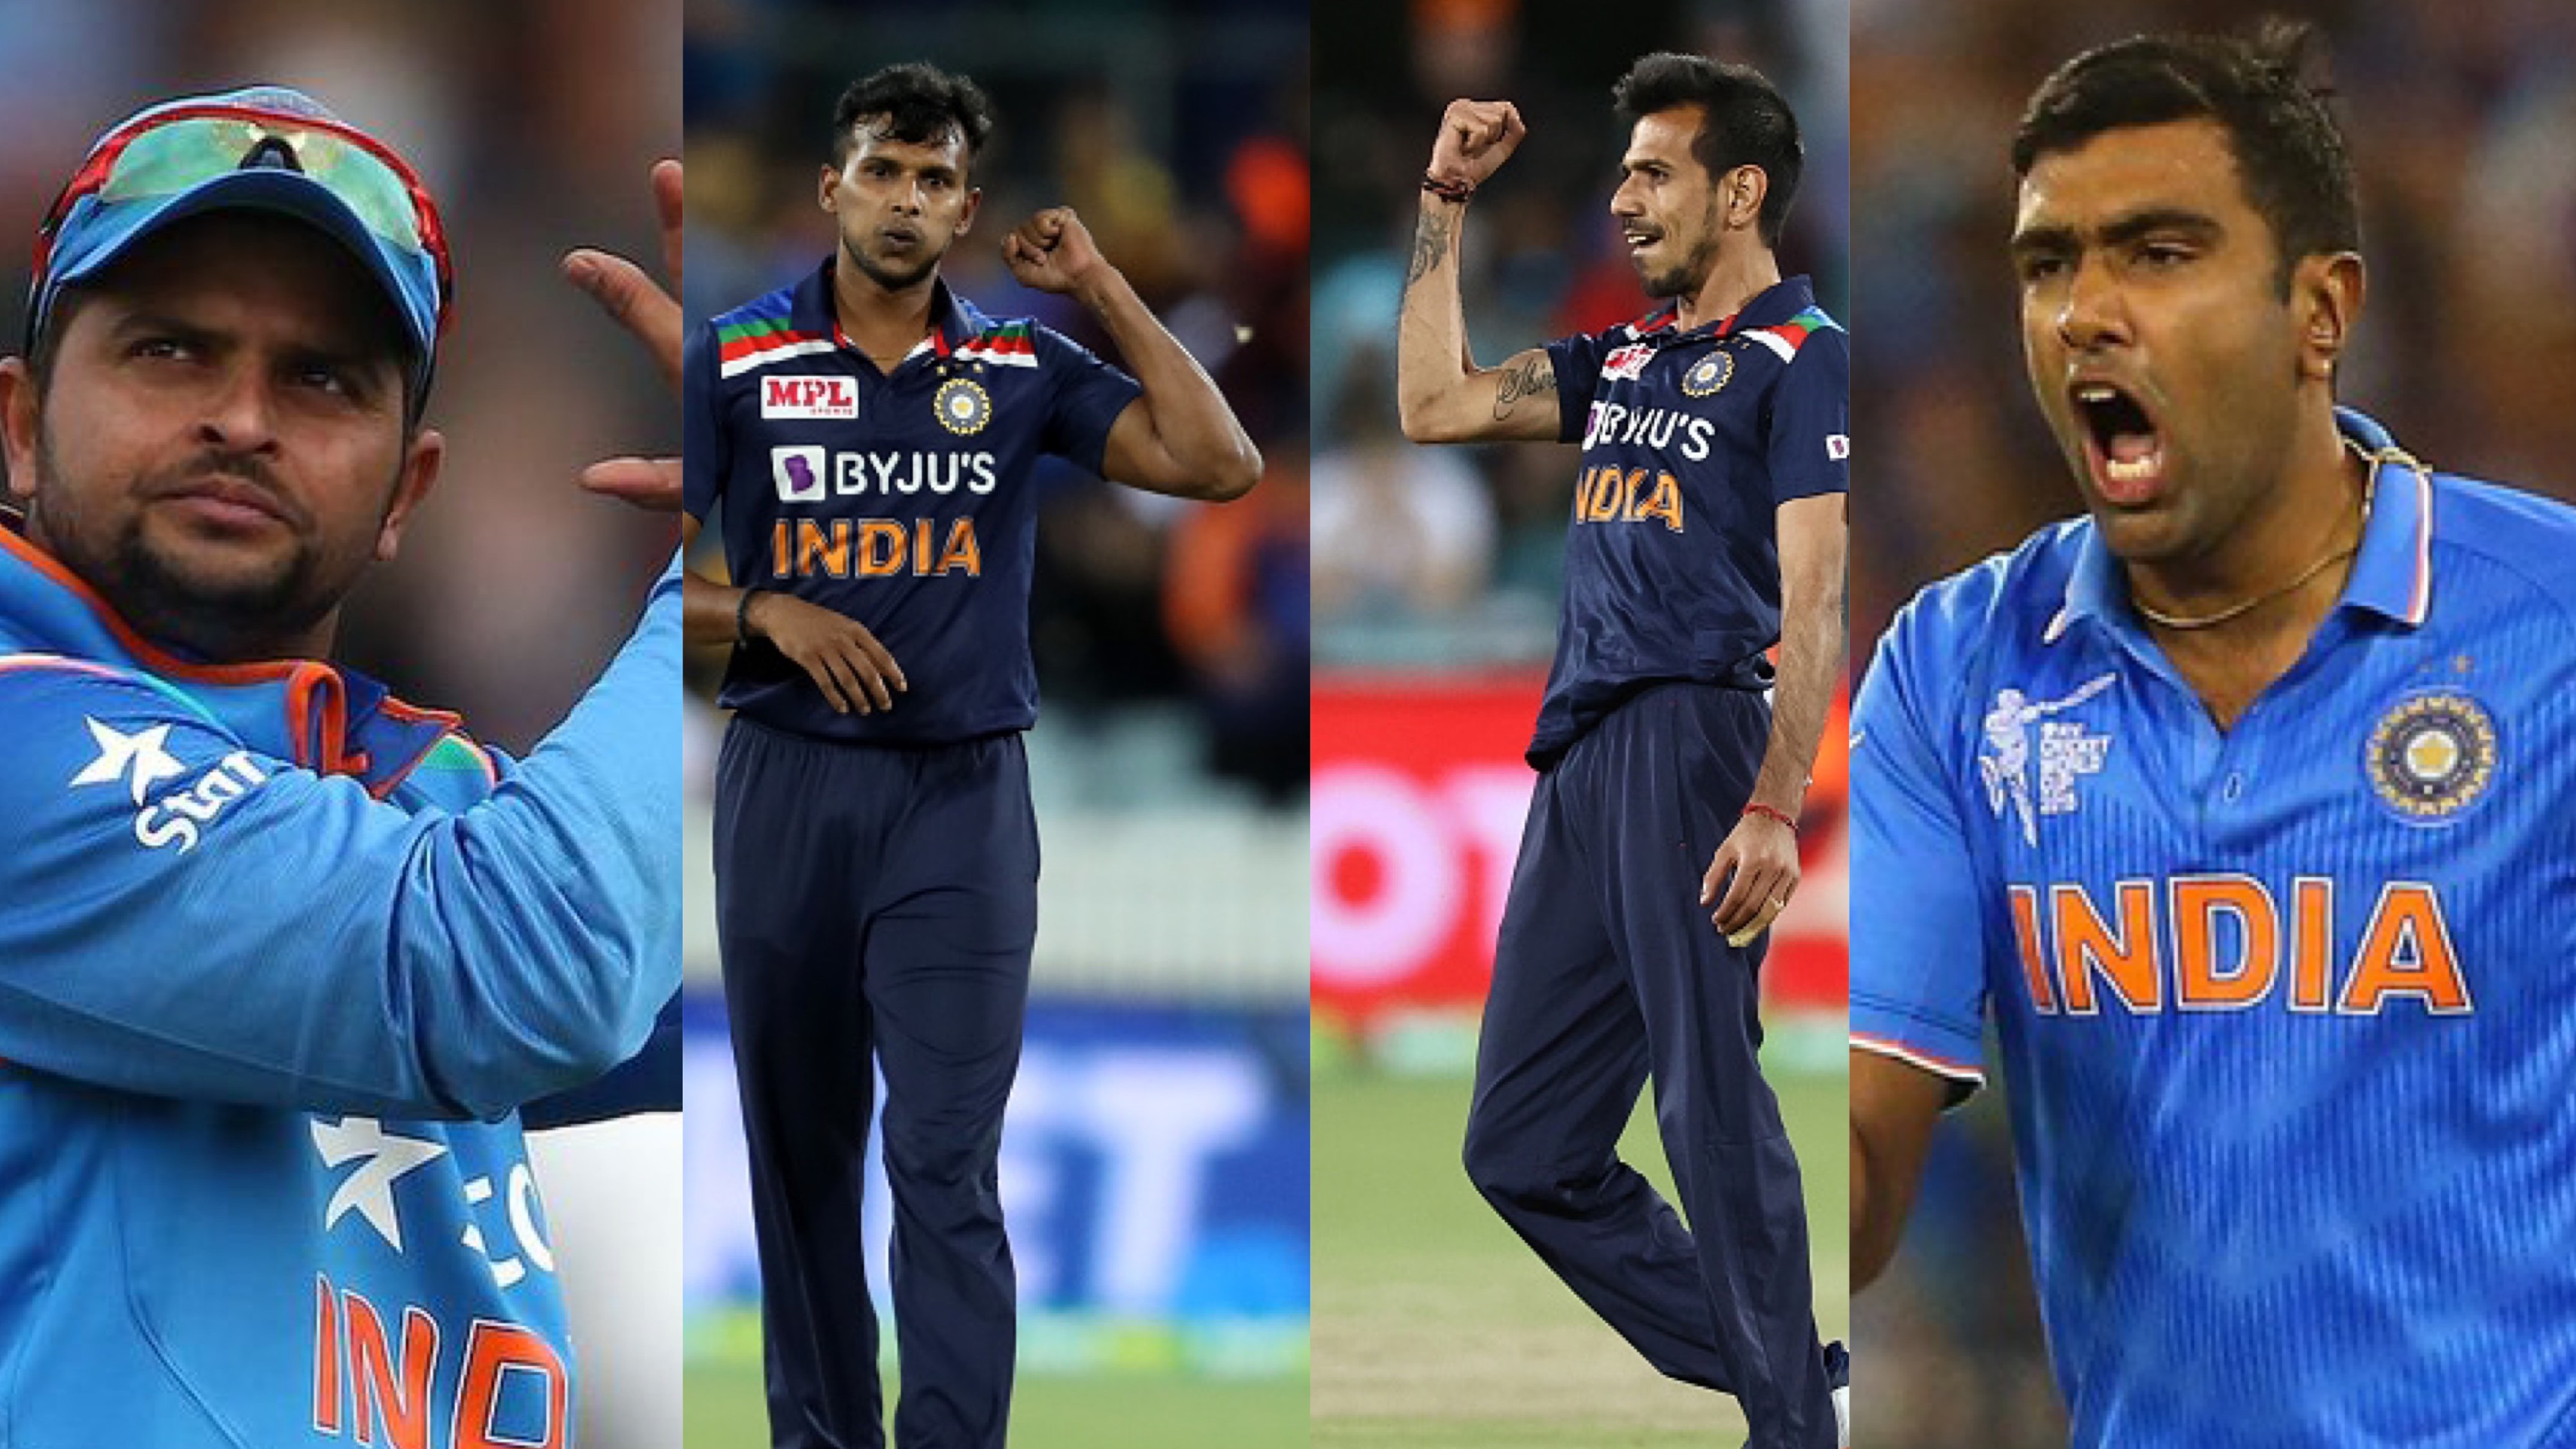 AUS v IND 2020-21: Cricket fraternity reacts as Chahal and Natarajan help India win the 1st T20I by 11 runs